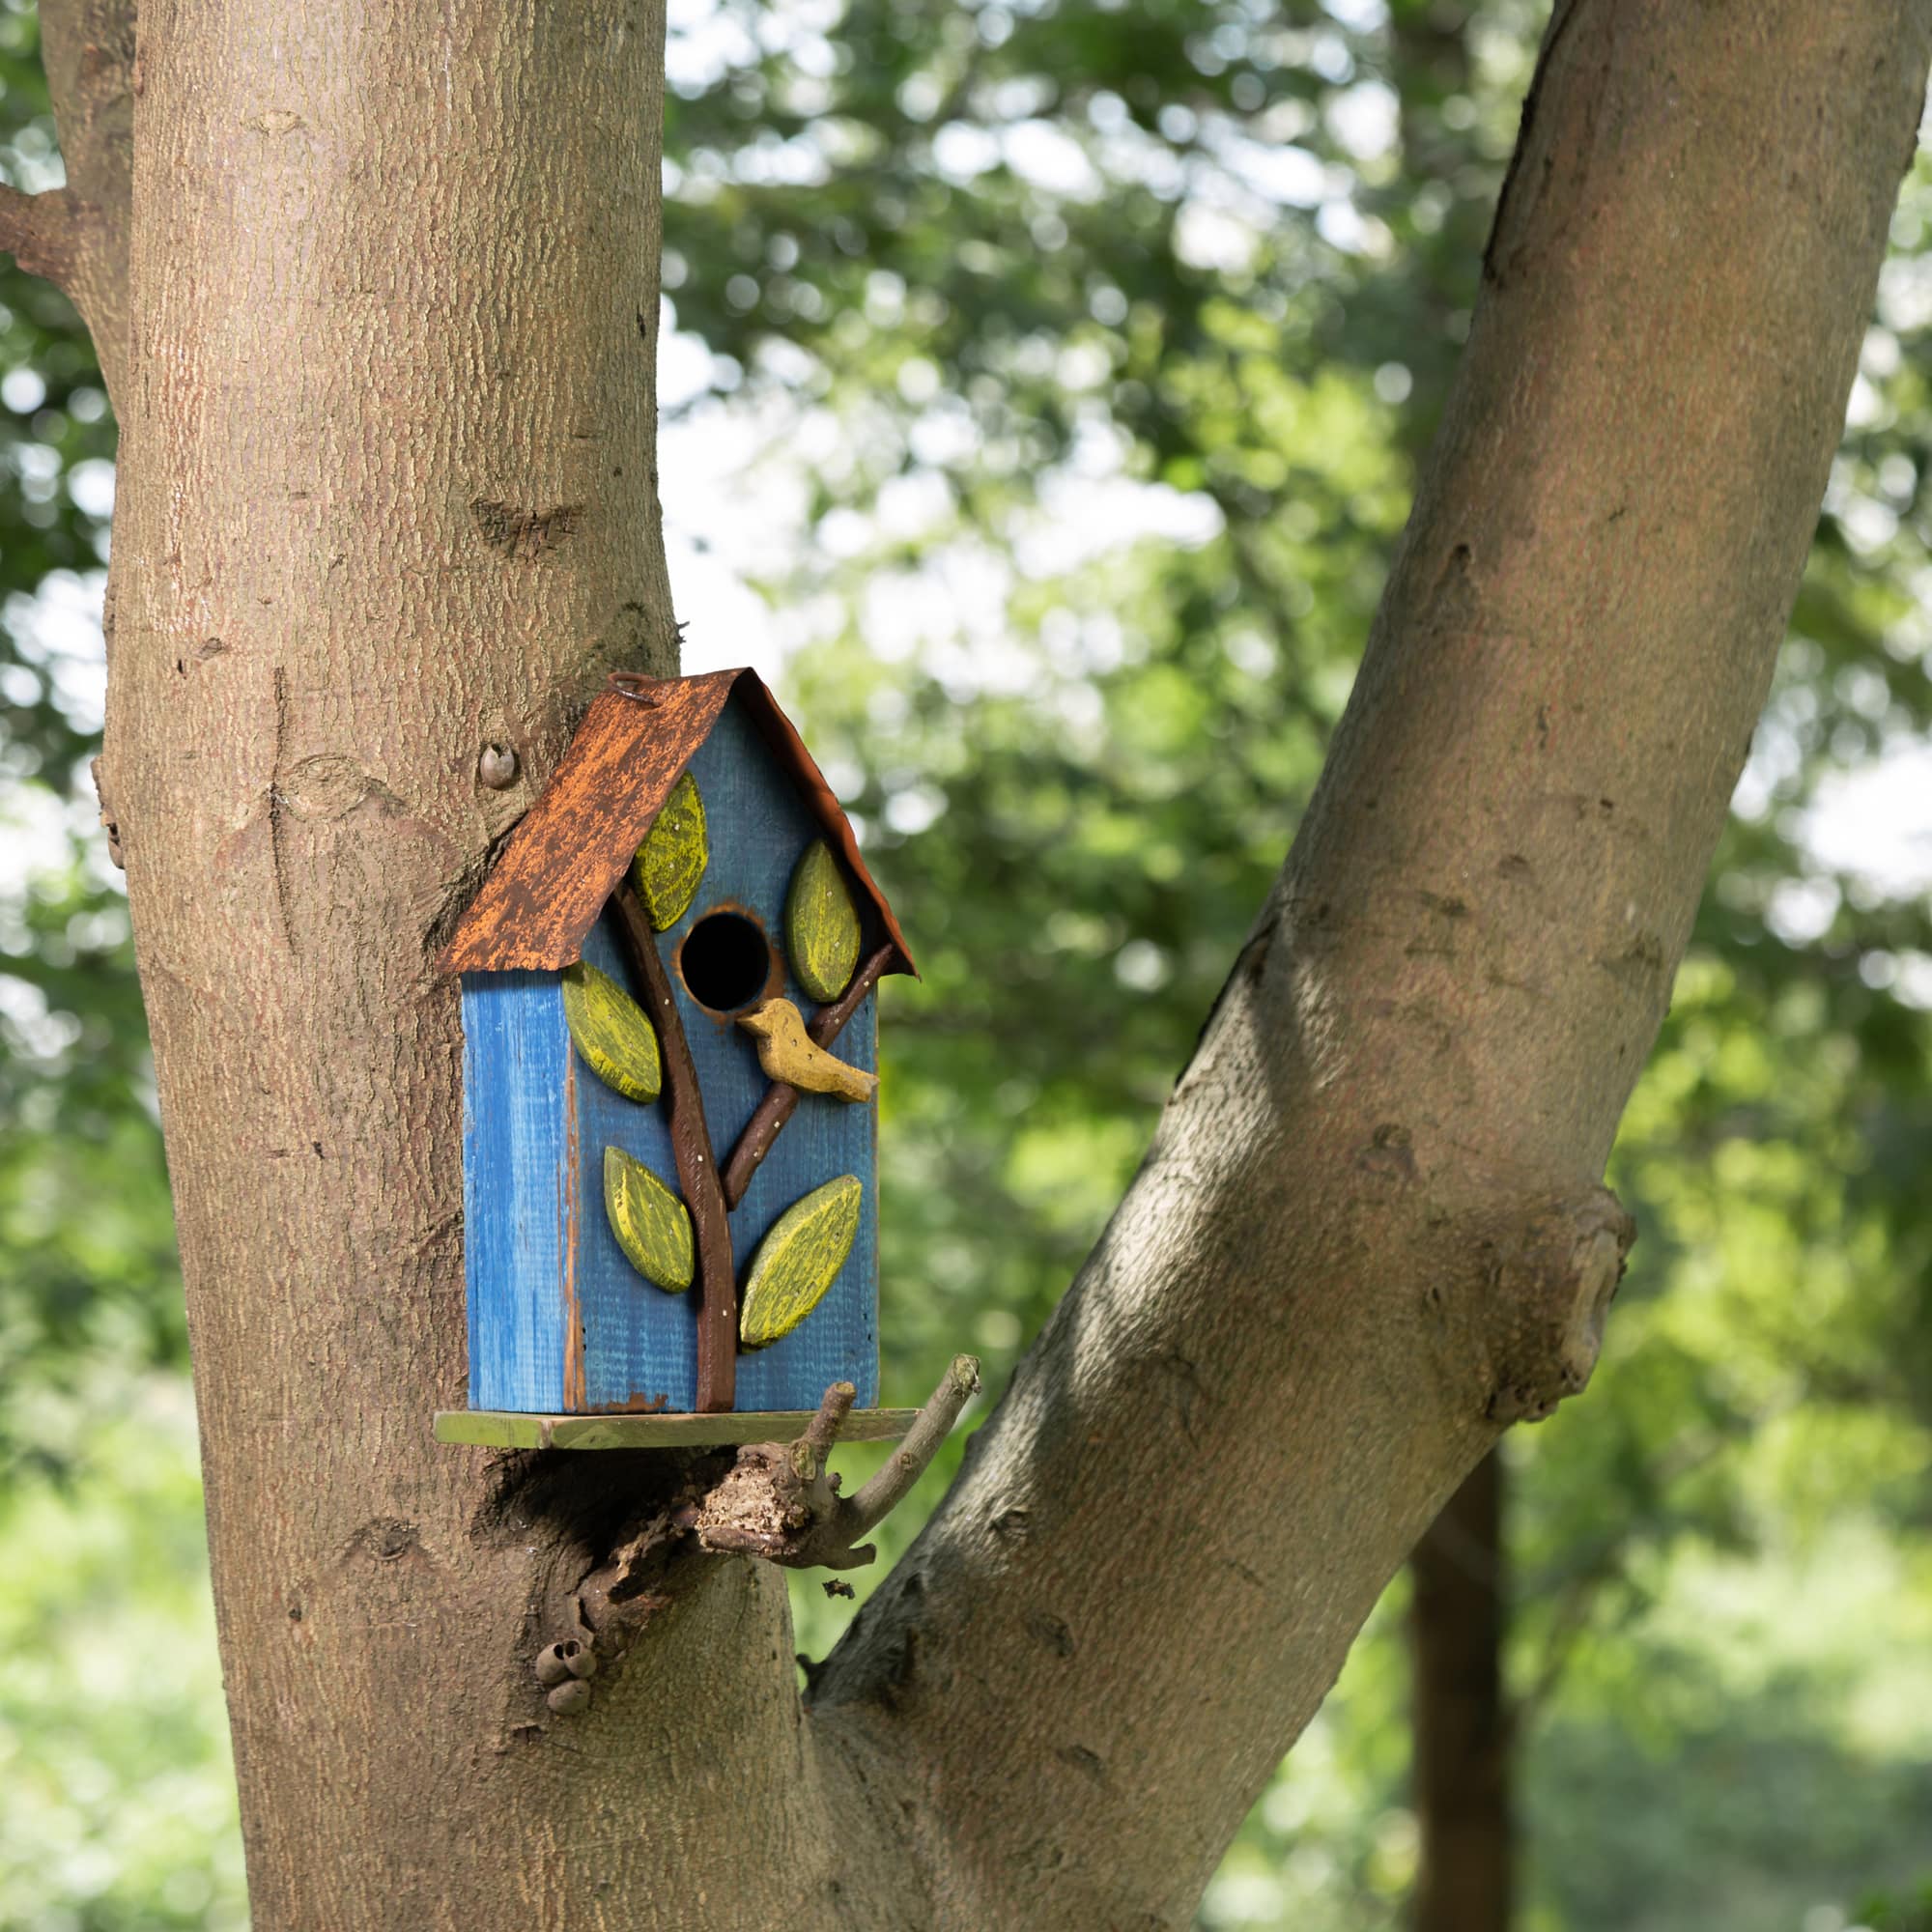 Glitzhome&#xAE; Distressed Wooden Birdhouse with Leaves